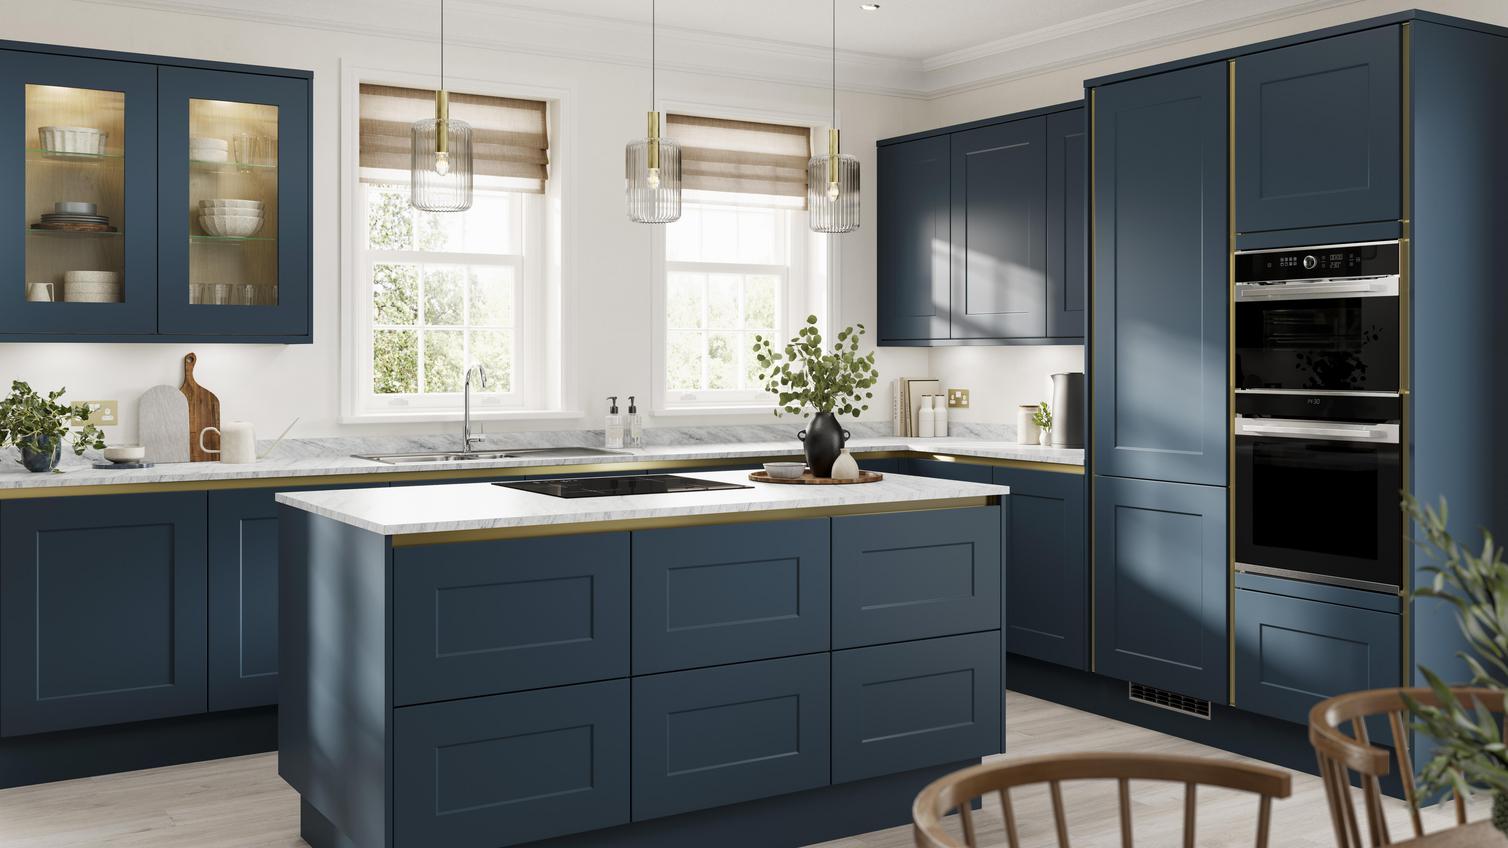 Handleless blue kitchen with marine tones and matt, shaker door fronts. Includes white worktops for a two-tone style